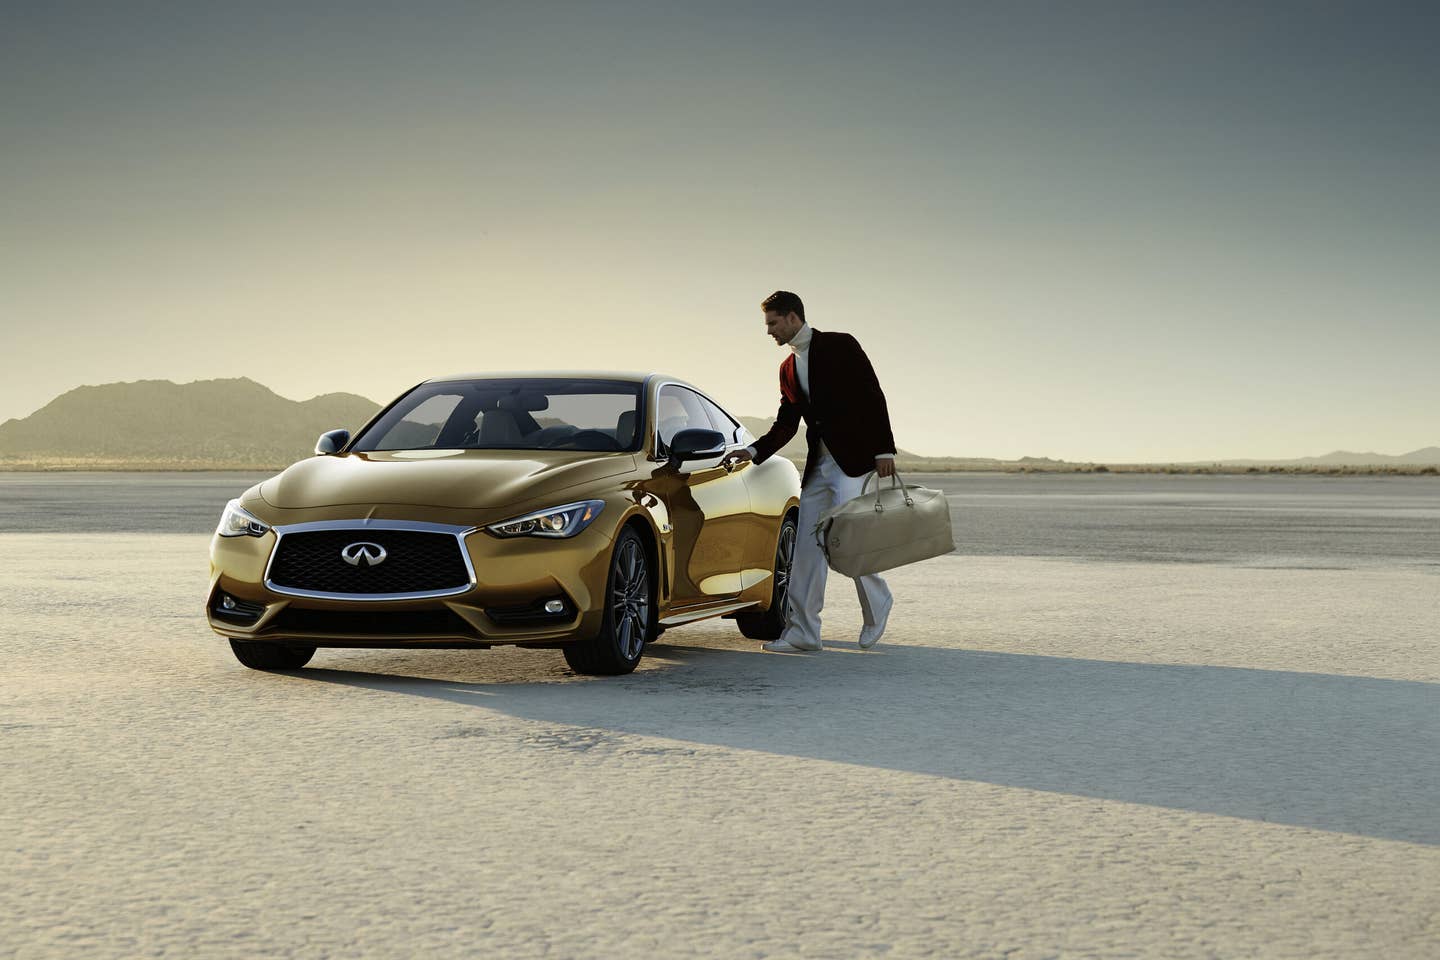 Based on the Red Sport 400 version of the all-new 2017 INFINITI Q60, the 400-horsepower INFINITI Q60 Neiman Marcus Limited Edition is equipped with a 3.0 liter-twin-turbocharged V6 engine and is painted a striking Solar Mica hue. The Nieman Marcus Limited Edition Q60 offers Direct Adaptive Steering™, Dynamic Digital Suspension, Bose® Performance Series premium audio system and INFINITI InTouch™ infotainment system. This special edition Q60 also features genuine carbon fiber accents on the fender vents, fog-light finishers, mirror caps and rear spoiler.  The interior is equipped with Gallery White leather-appointed sports seats and Silver Optic Fiber Interior Trim.